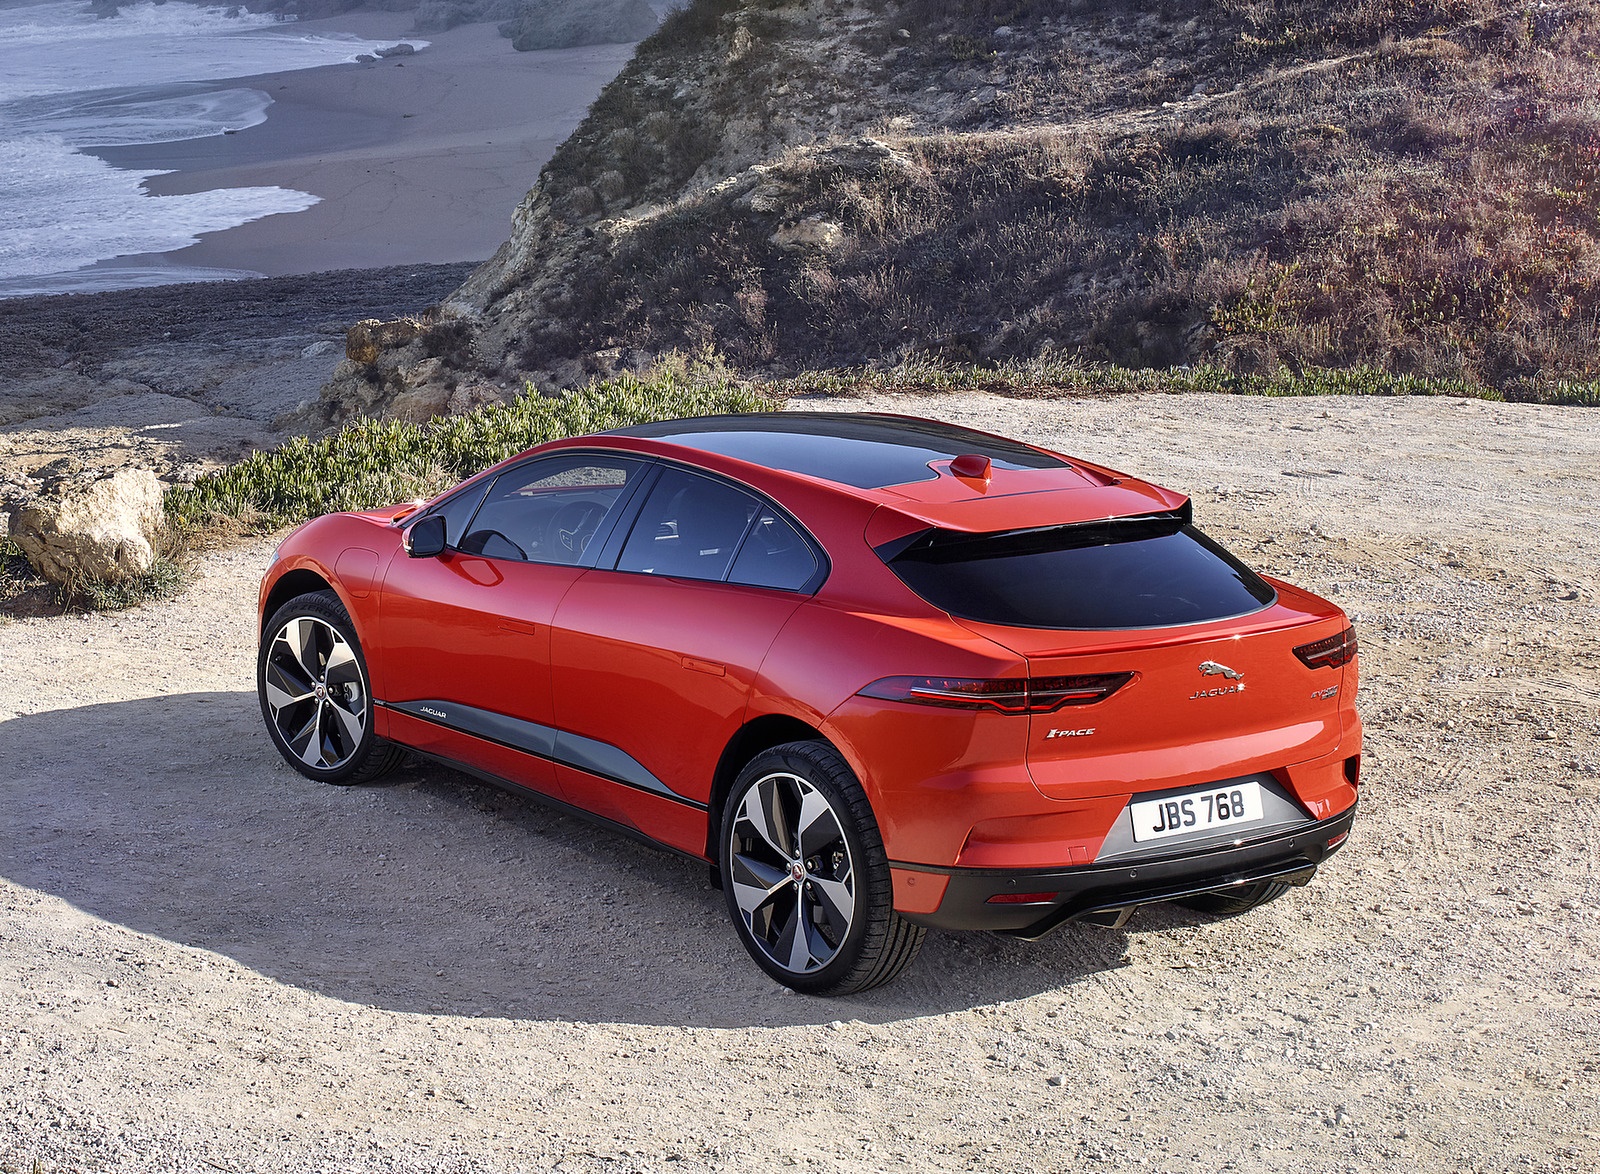 2019 Jaguar I-PACE (Color: Photon Red) Rear Three-Quarter Wallpapers #92 of 192